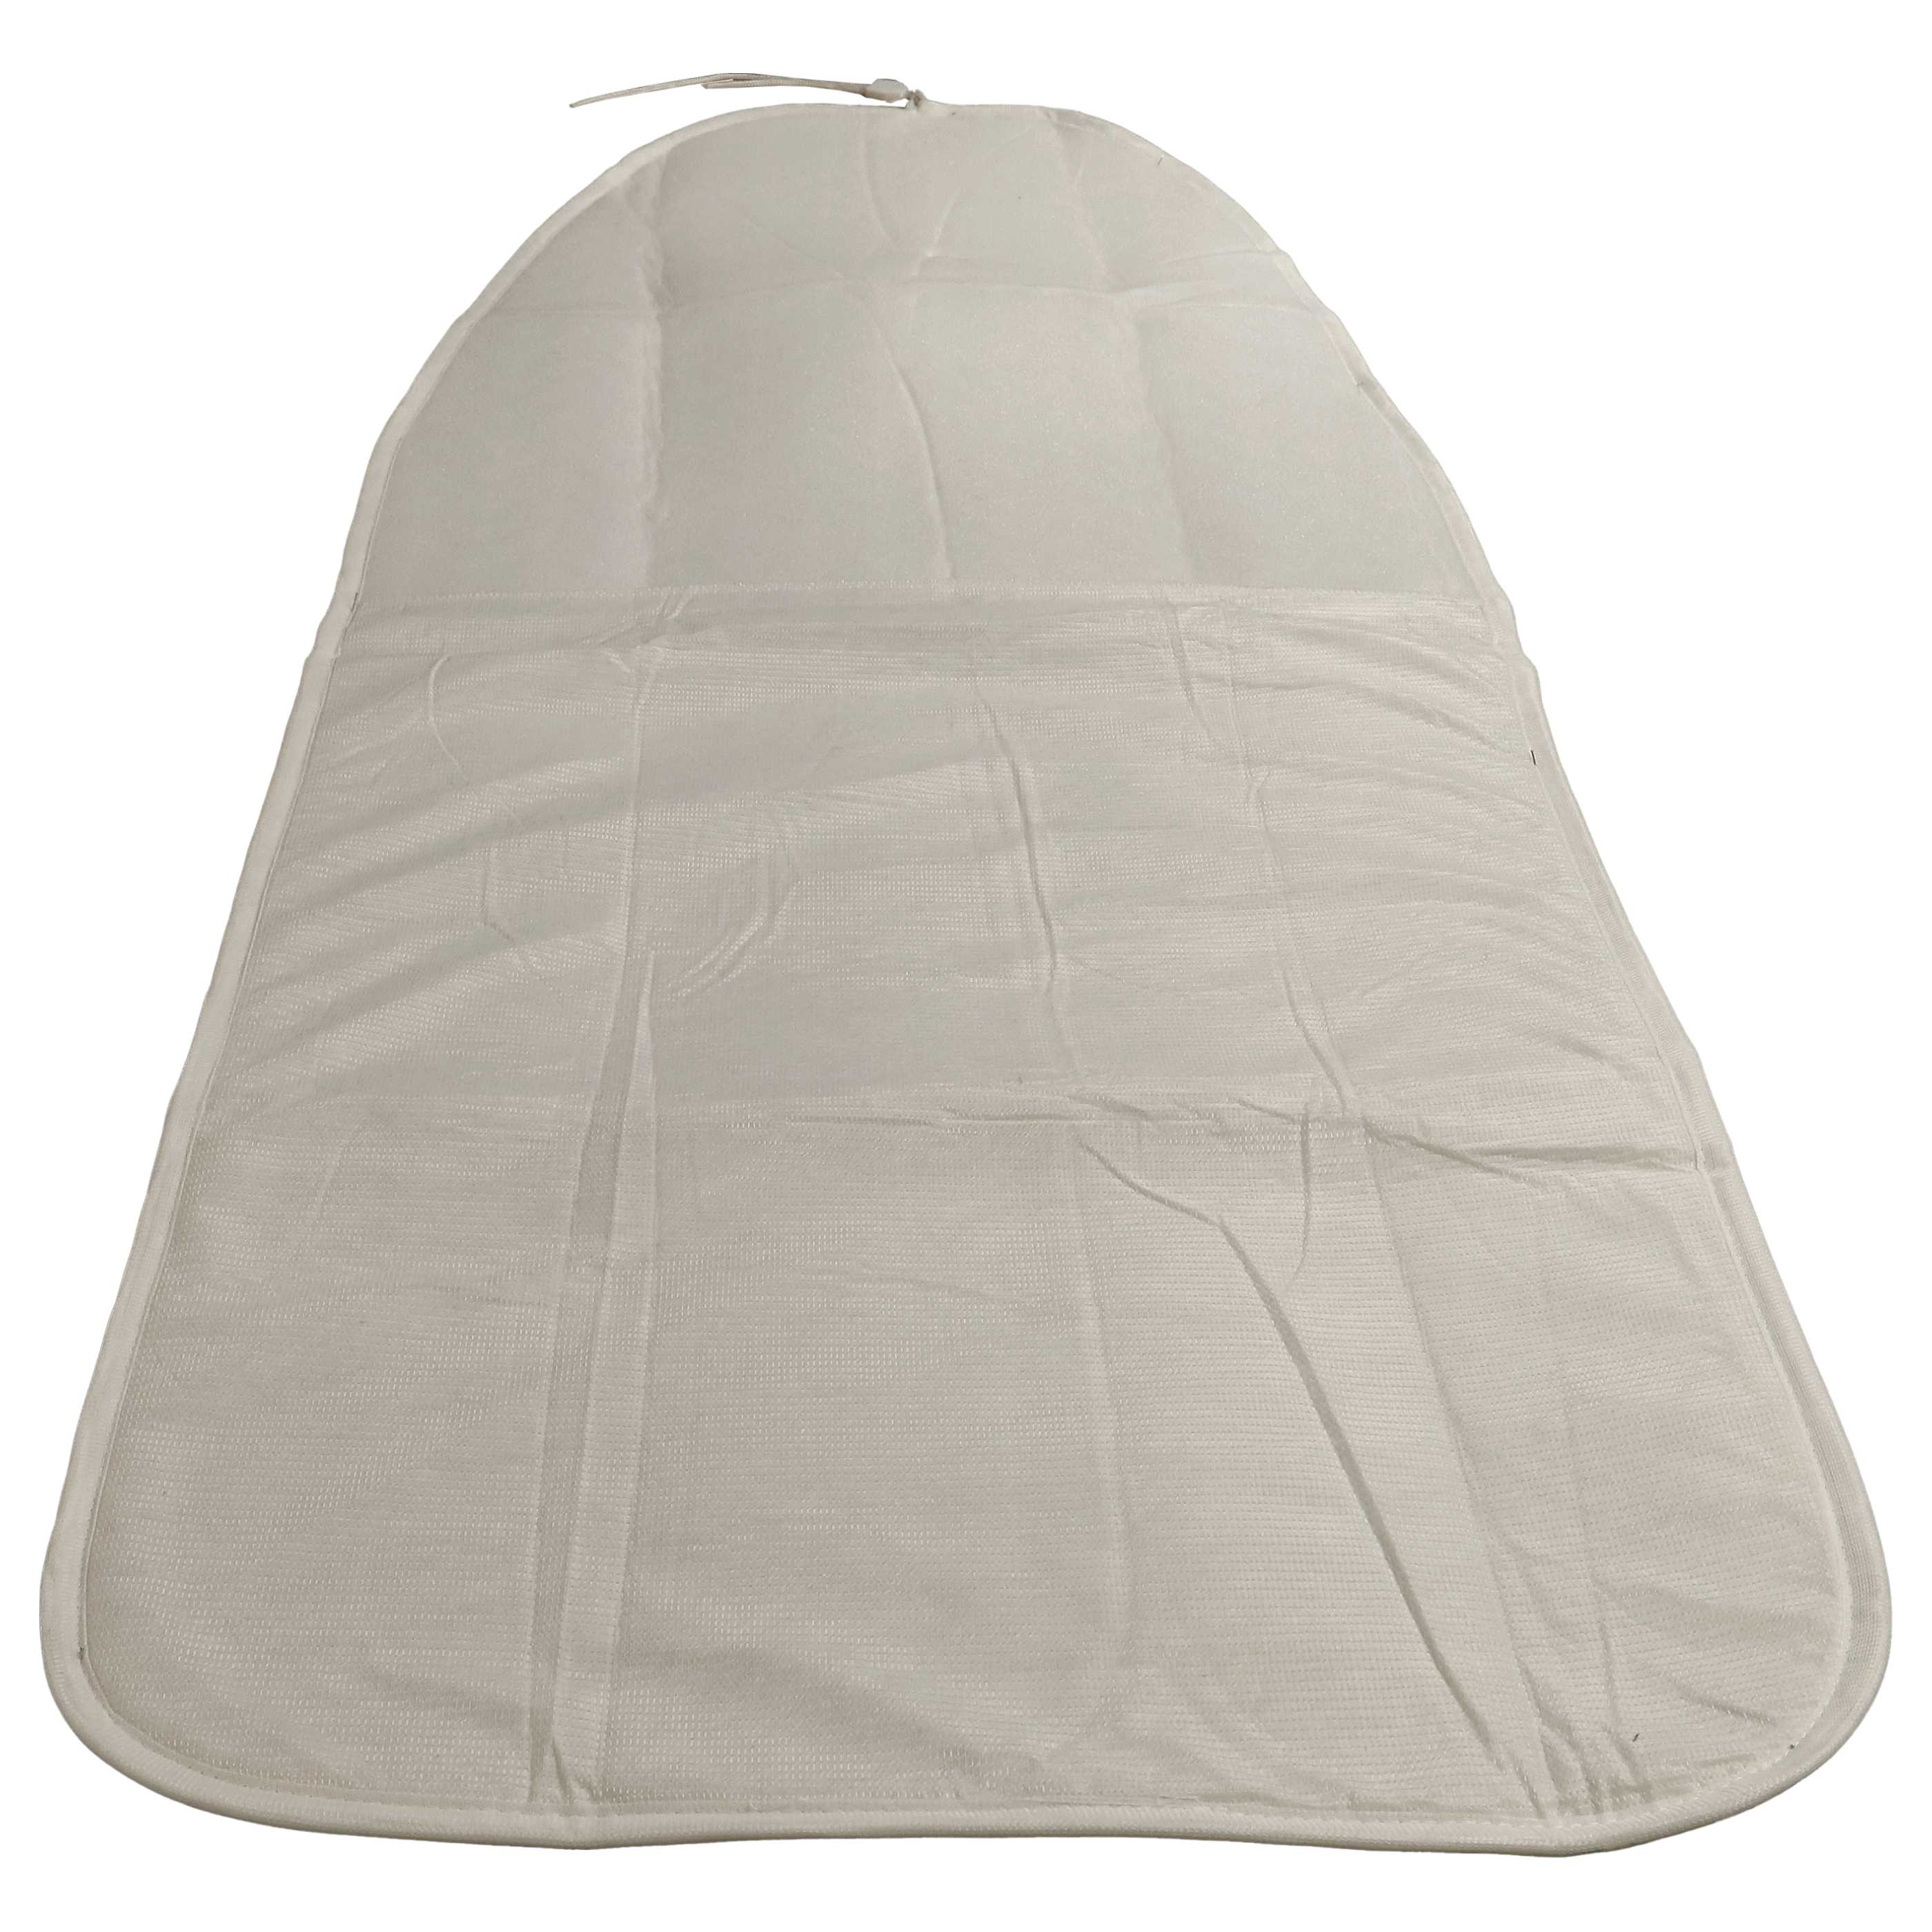 Ironing Board Cover replaces Laurastar myCover 131, 144.7842.898 for Bosch Ironing Board - Ironing Board Cover